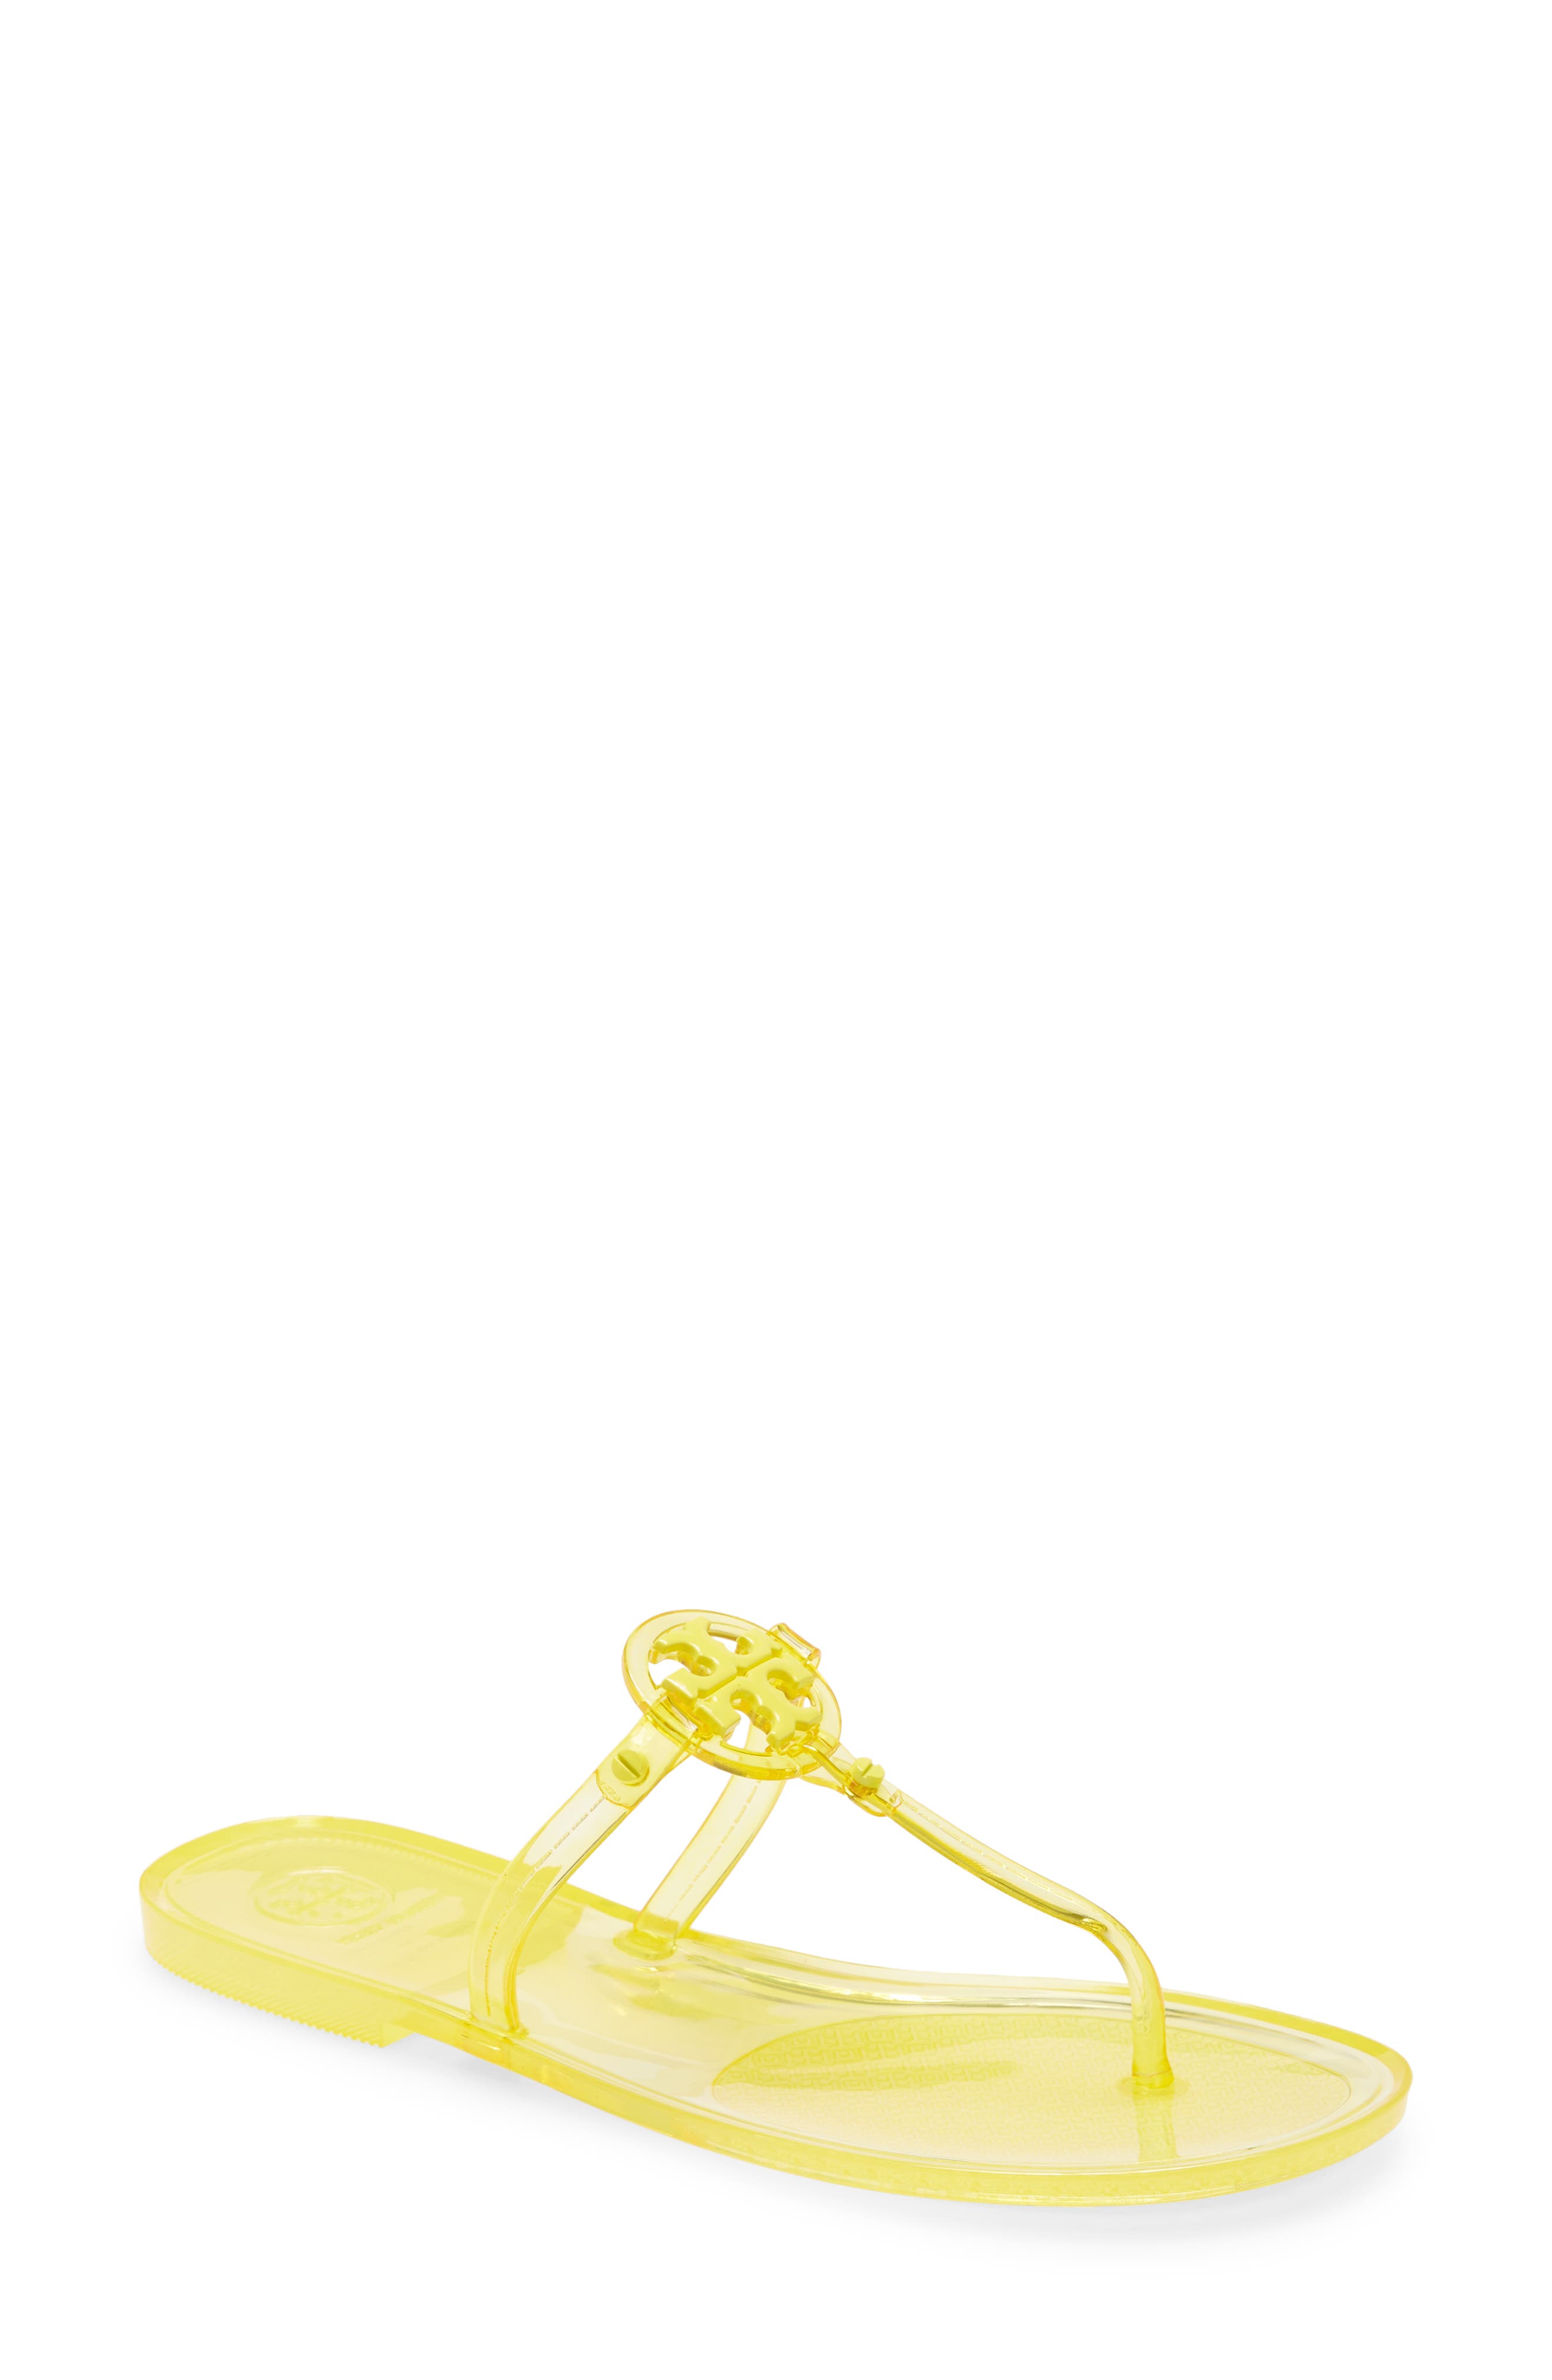 lime green tory burch sandals